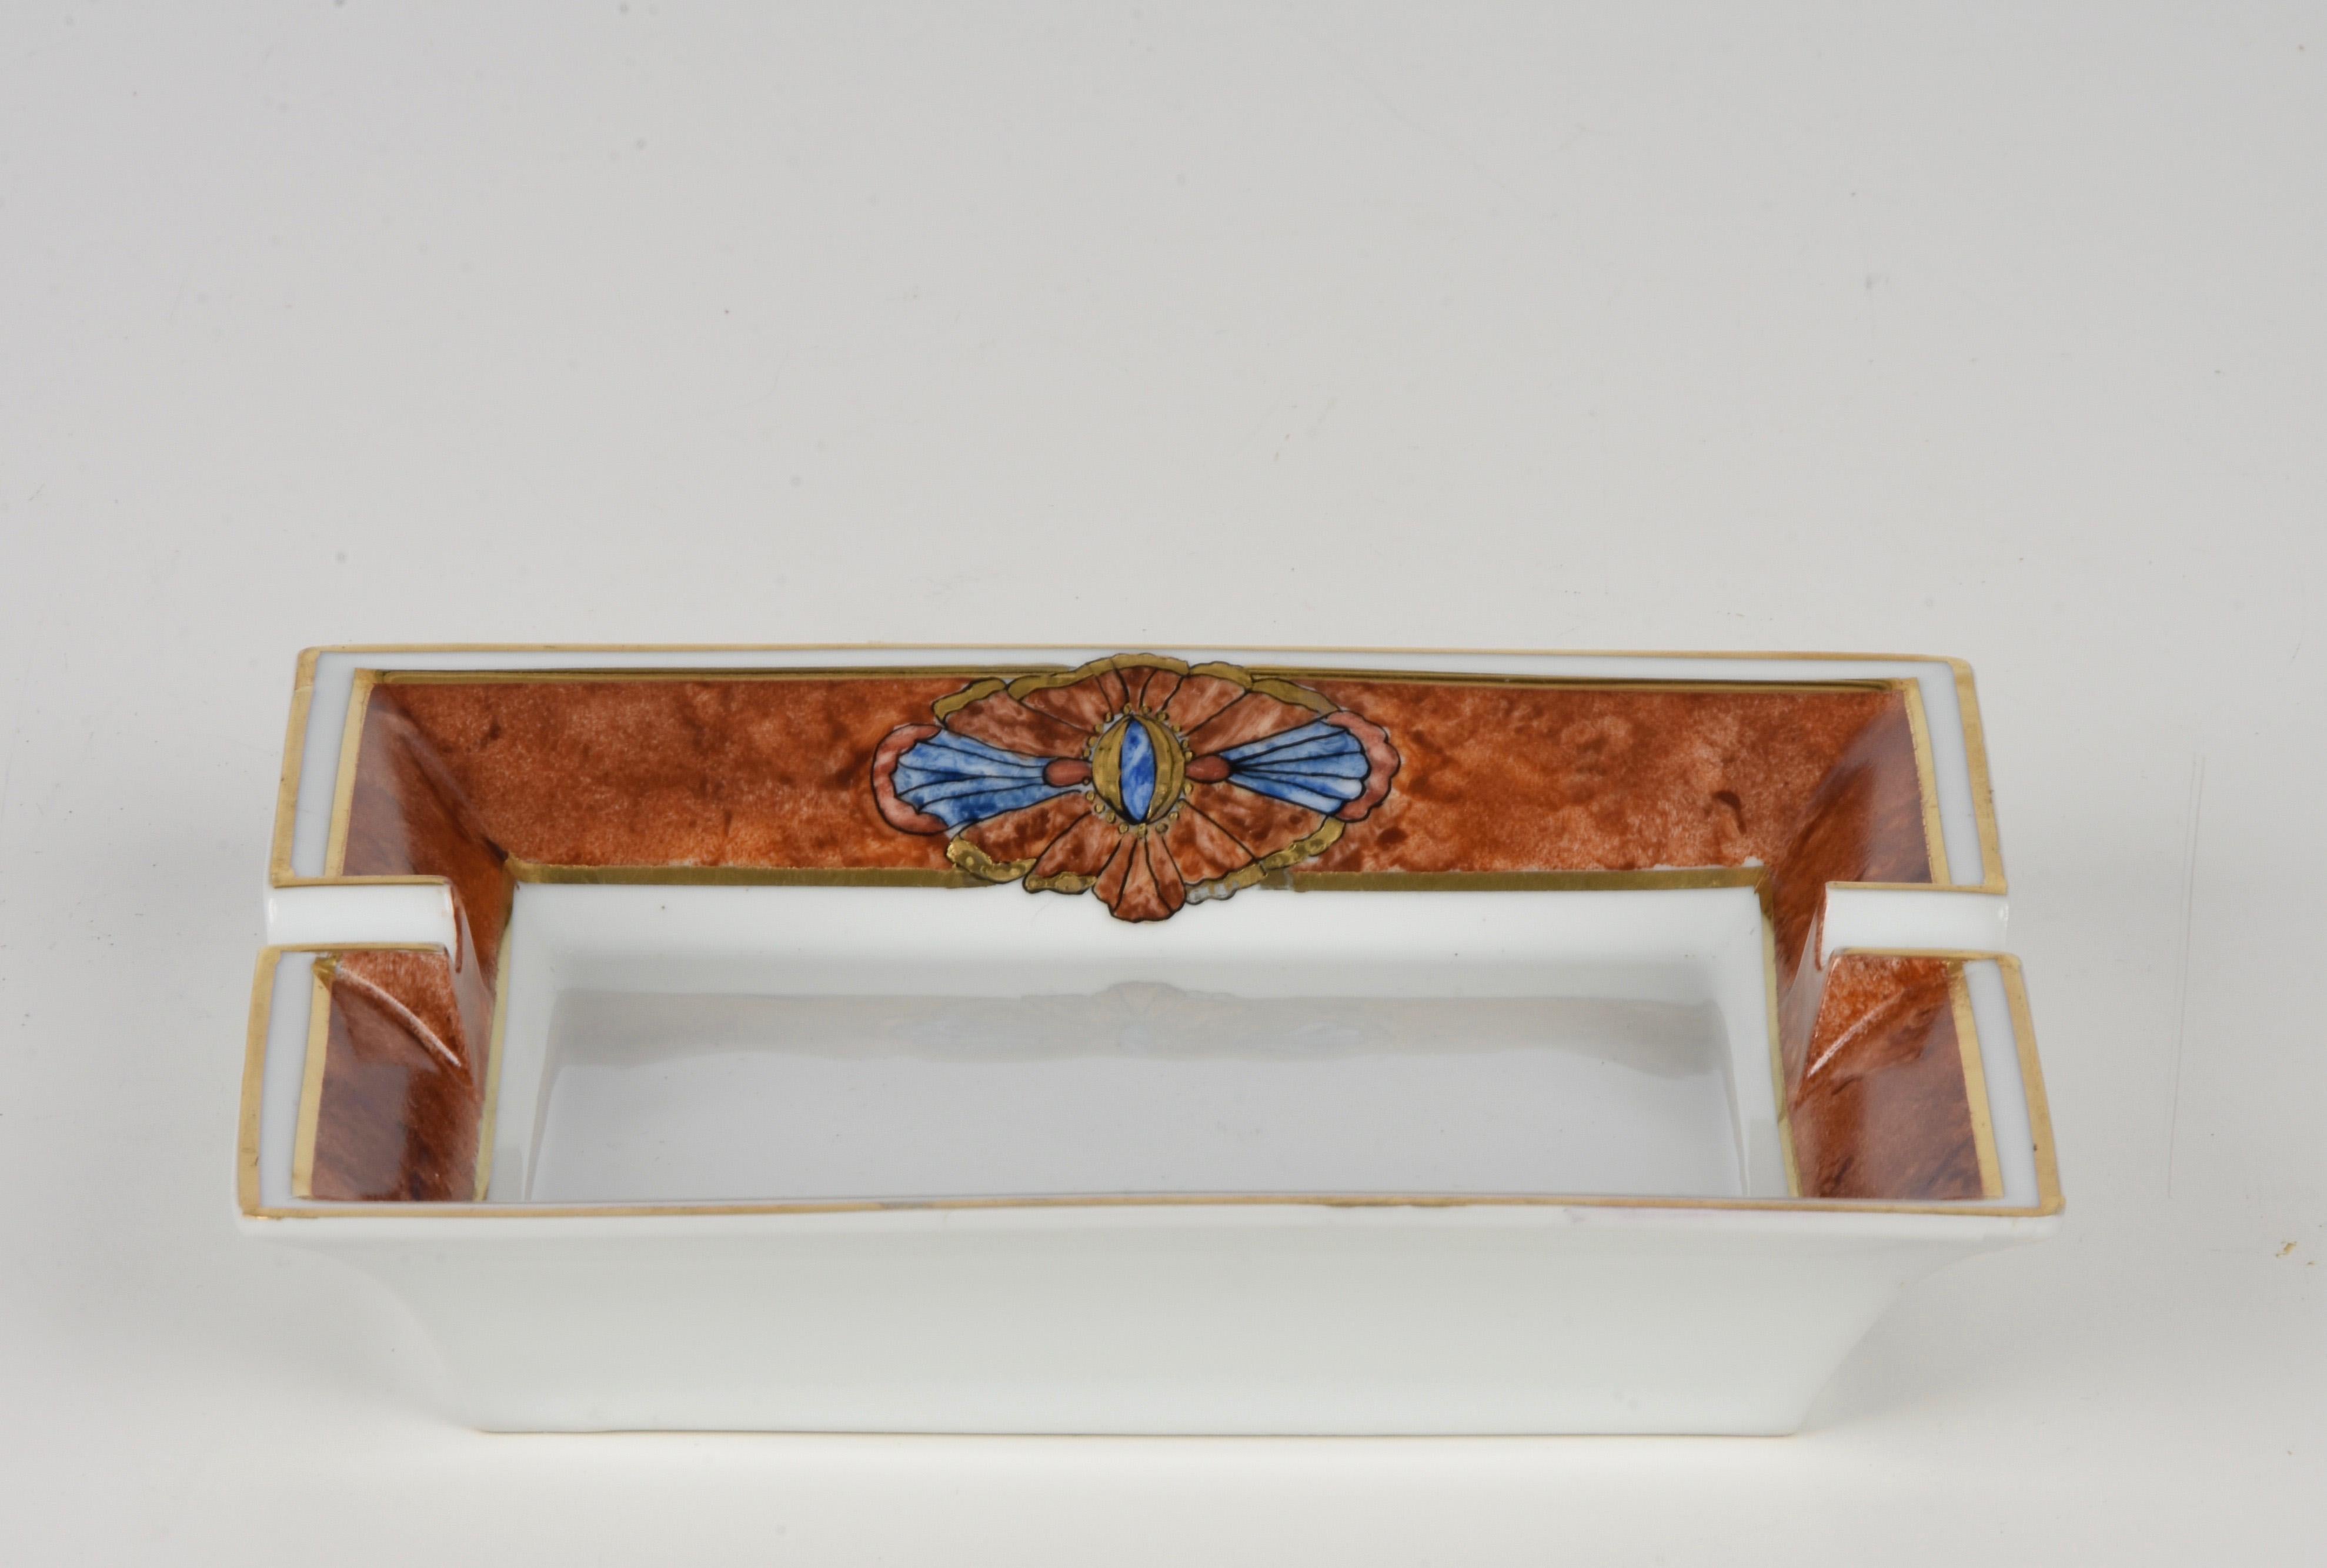 Limoges Midcentury Hand-Painted by Cevoli White Porcelain French Ashtray, 1980s For Sale 4